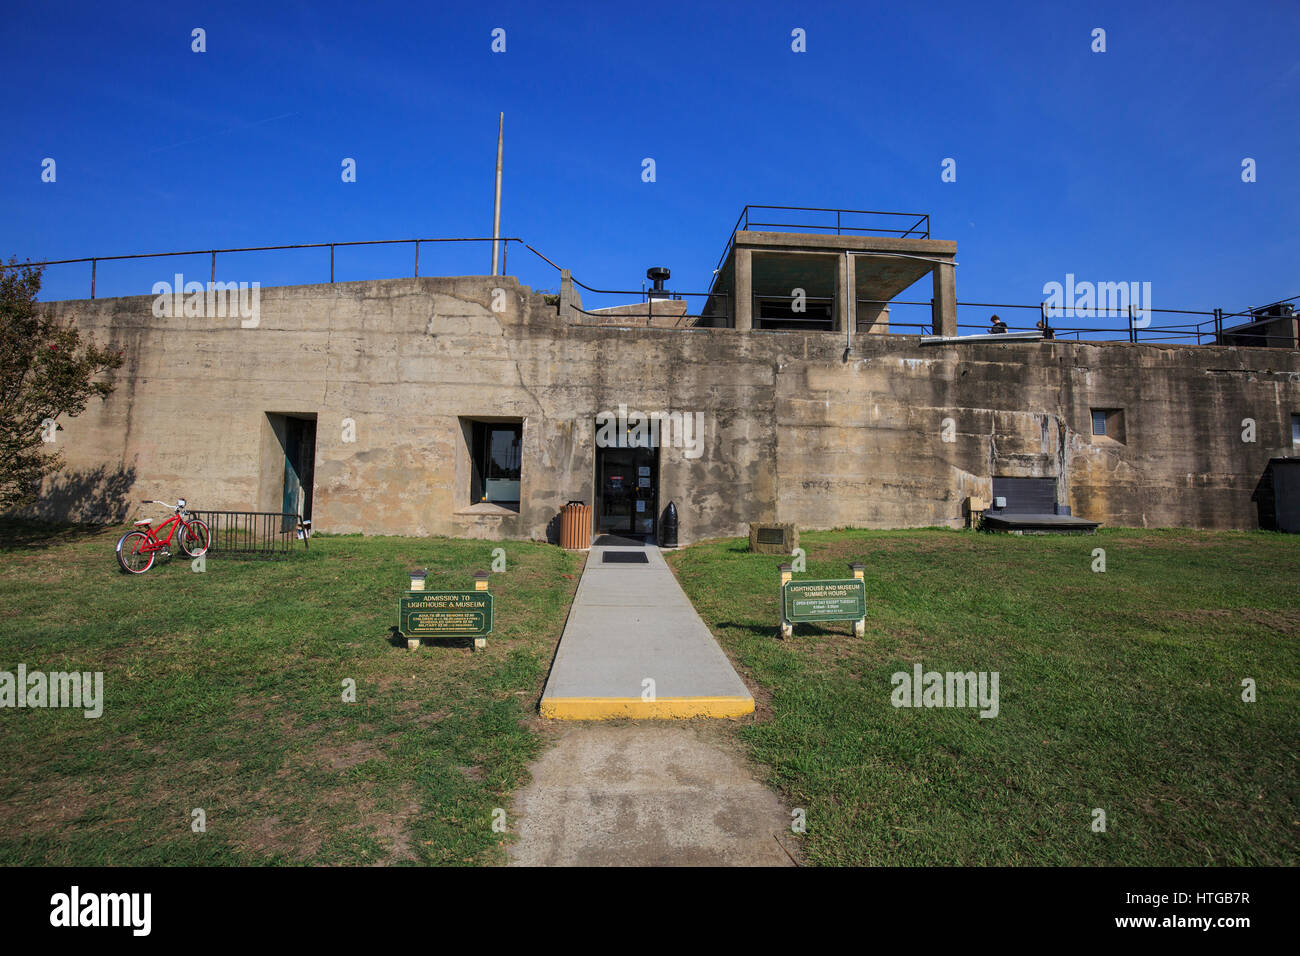 Exterior of Battery Garland, old coastal defense fort and now part of the Tybee Island Lighthouse property. Stock Photo